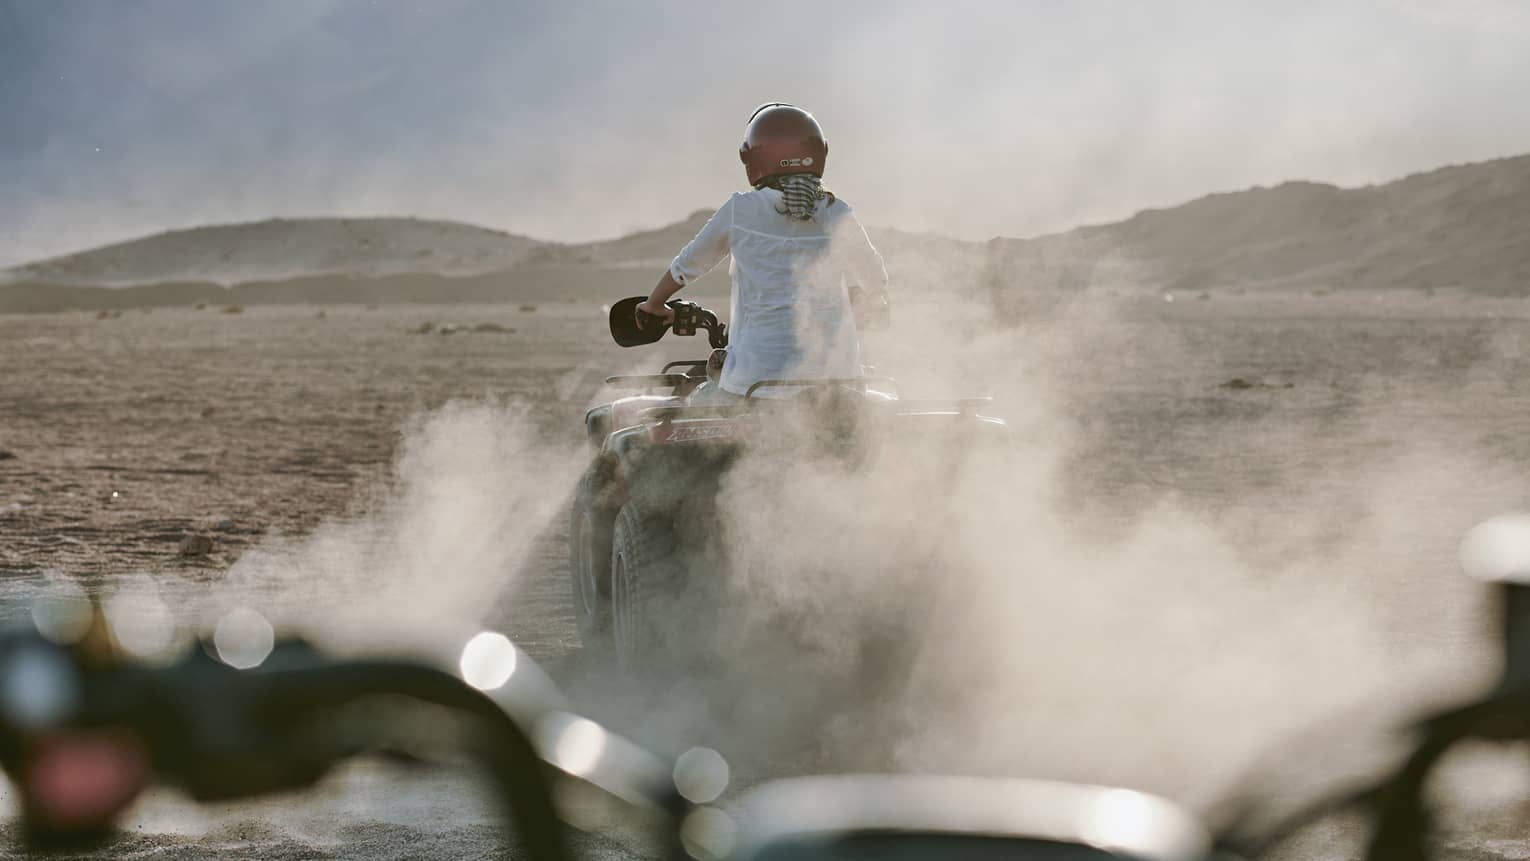 Rear view of an adventurer donning a red helmet while riding an ATV amid dust clouds; desert mountains ahead in the distance.